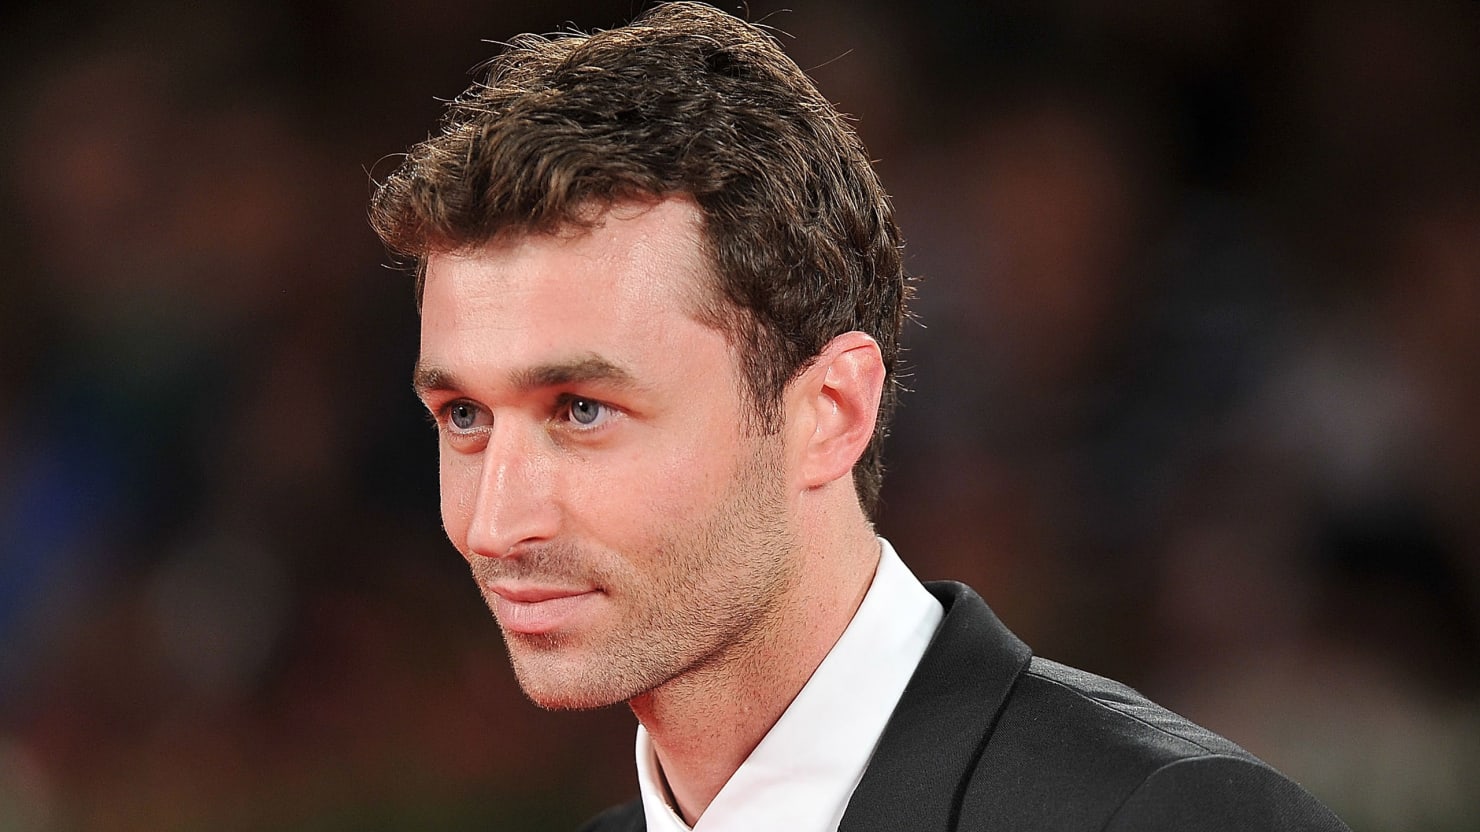 Porn Stars Who Have Tested Positive For Aids - Dinner With James Deen During Porn's Latest HIV Scare